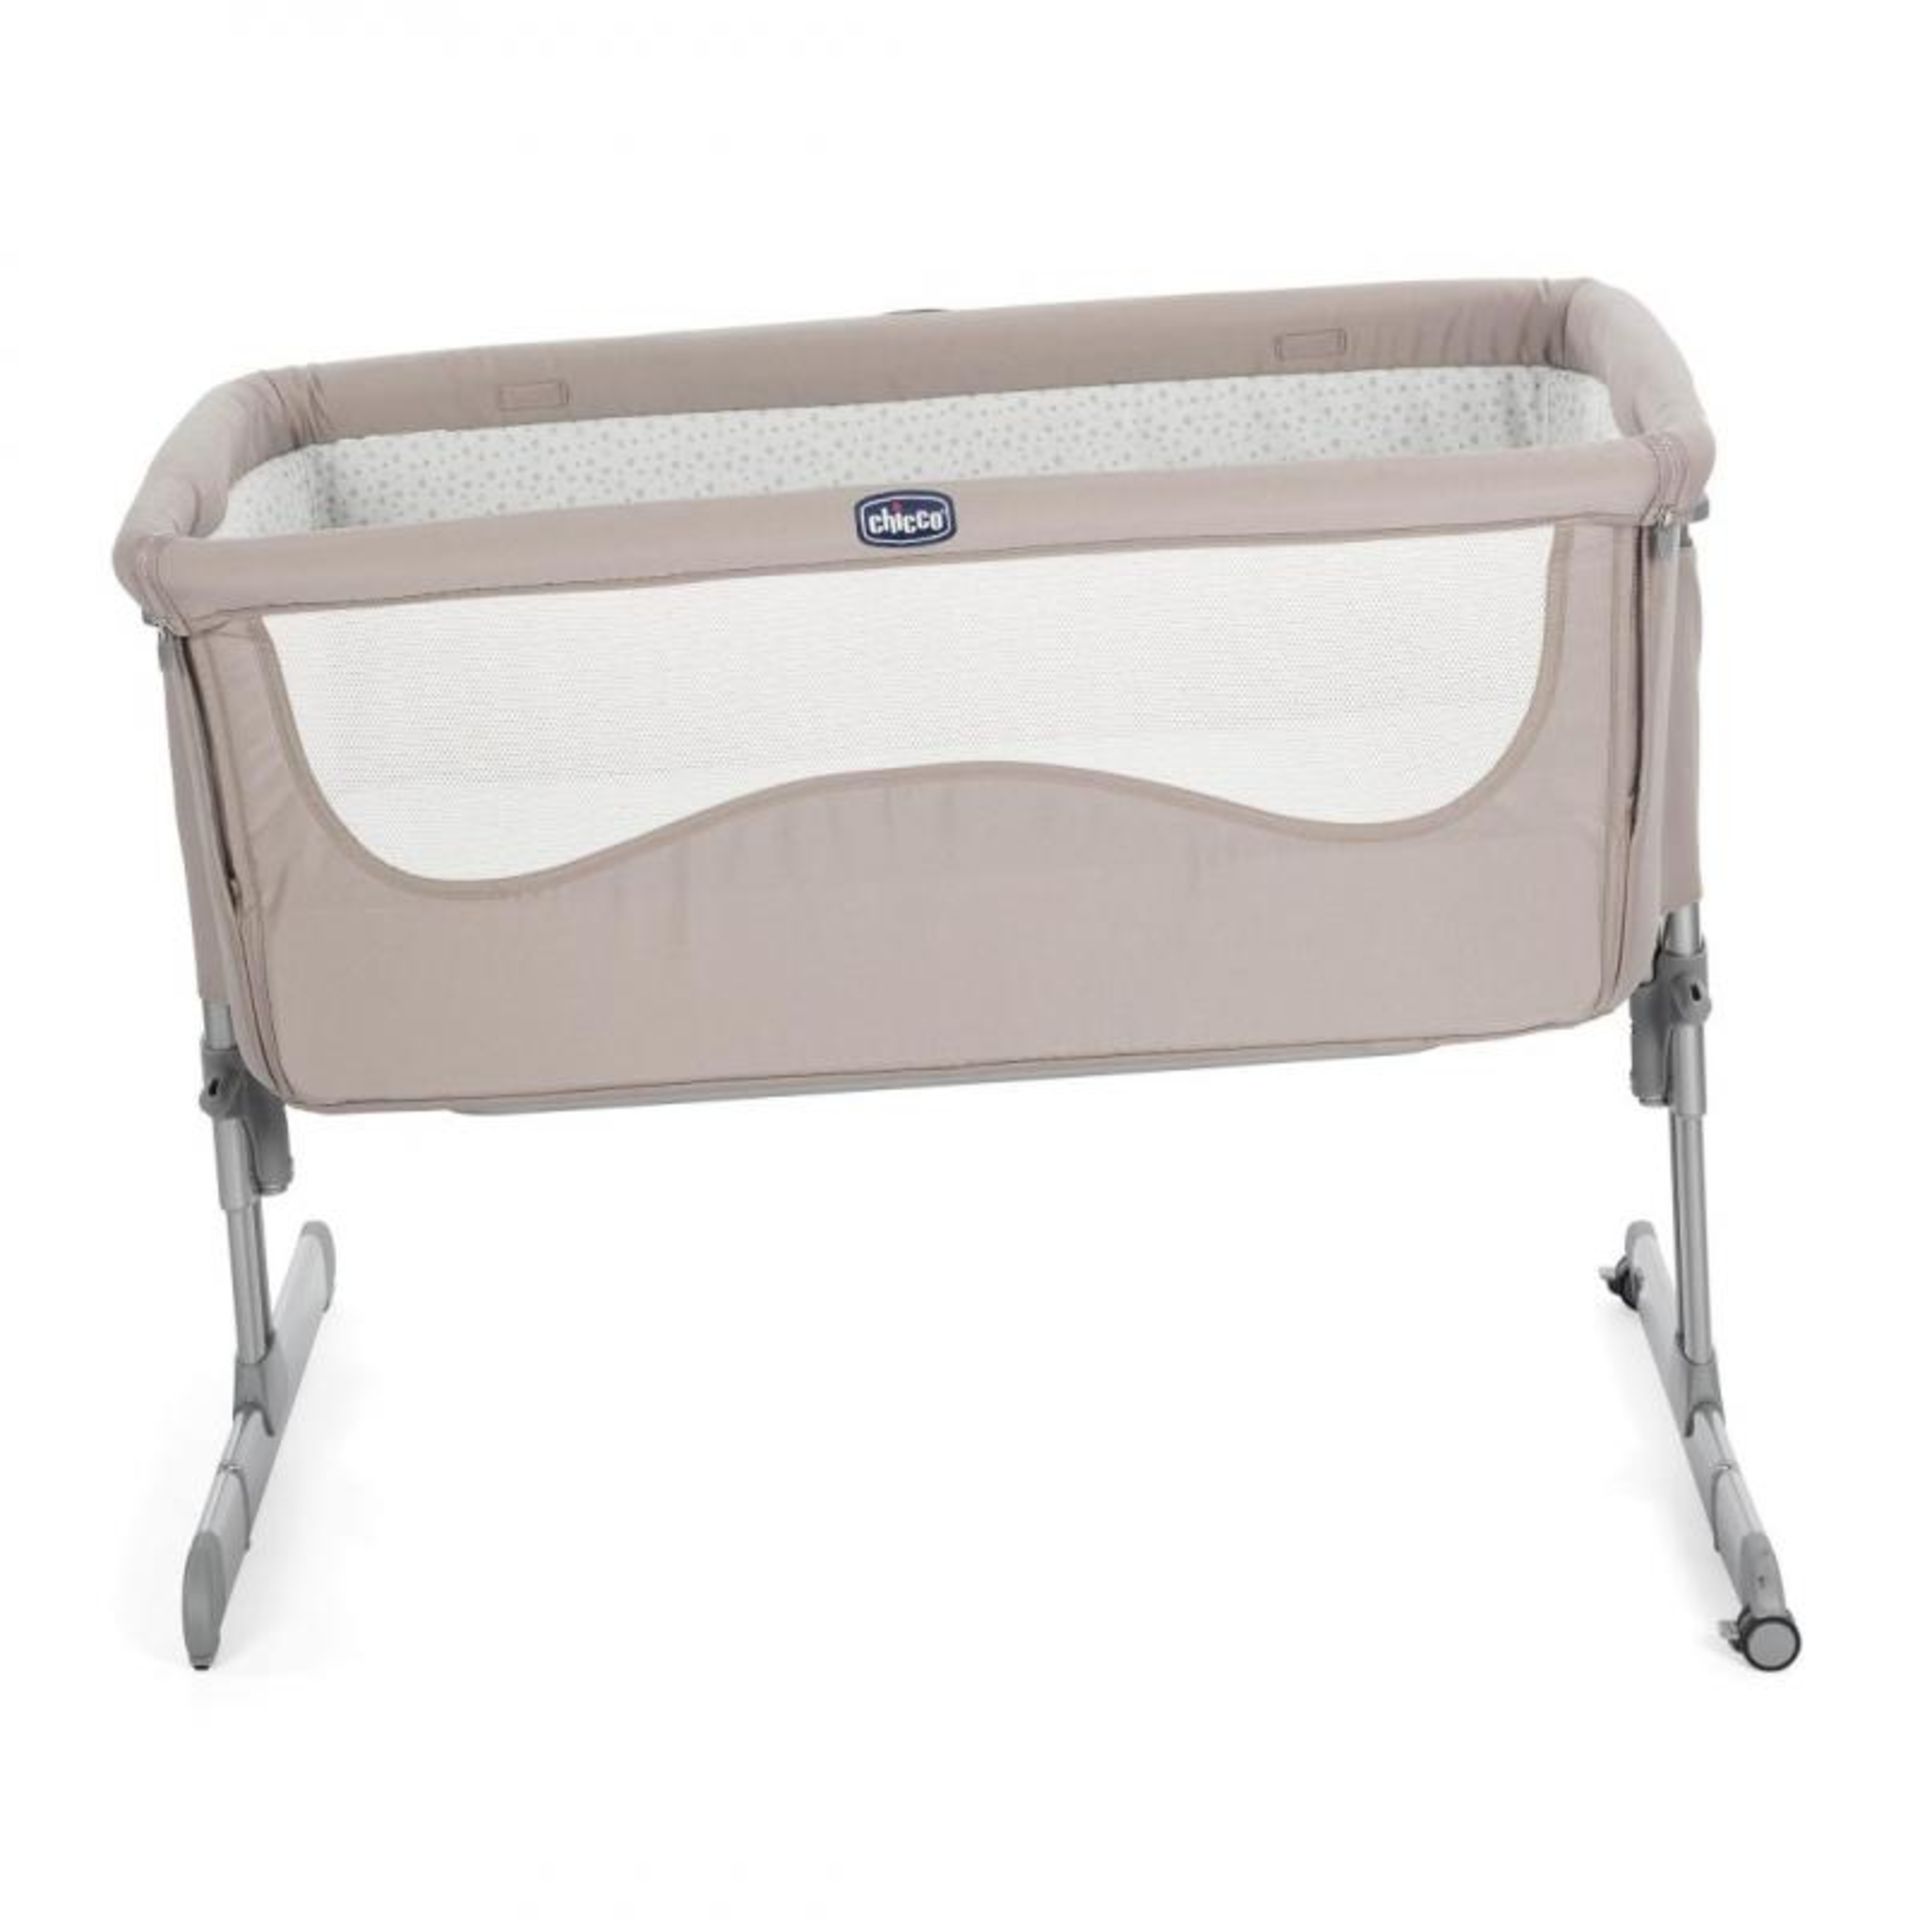 1 x Chicco Next2me Chick to Chick Bedside Baby Crib - Brand New 2019 Sealed Stock - Includes Mattres - Image 3 of 3